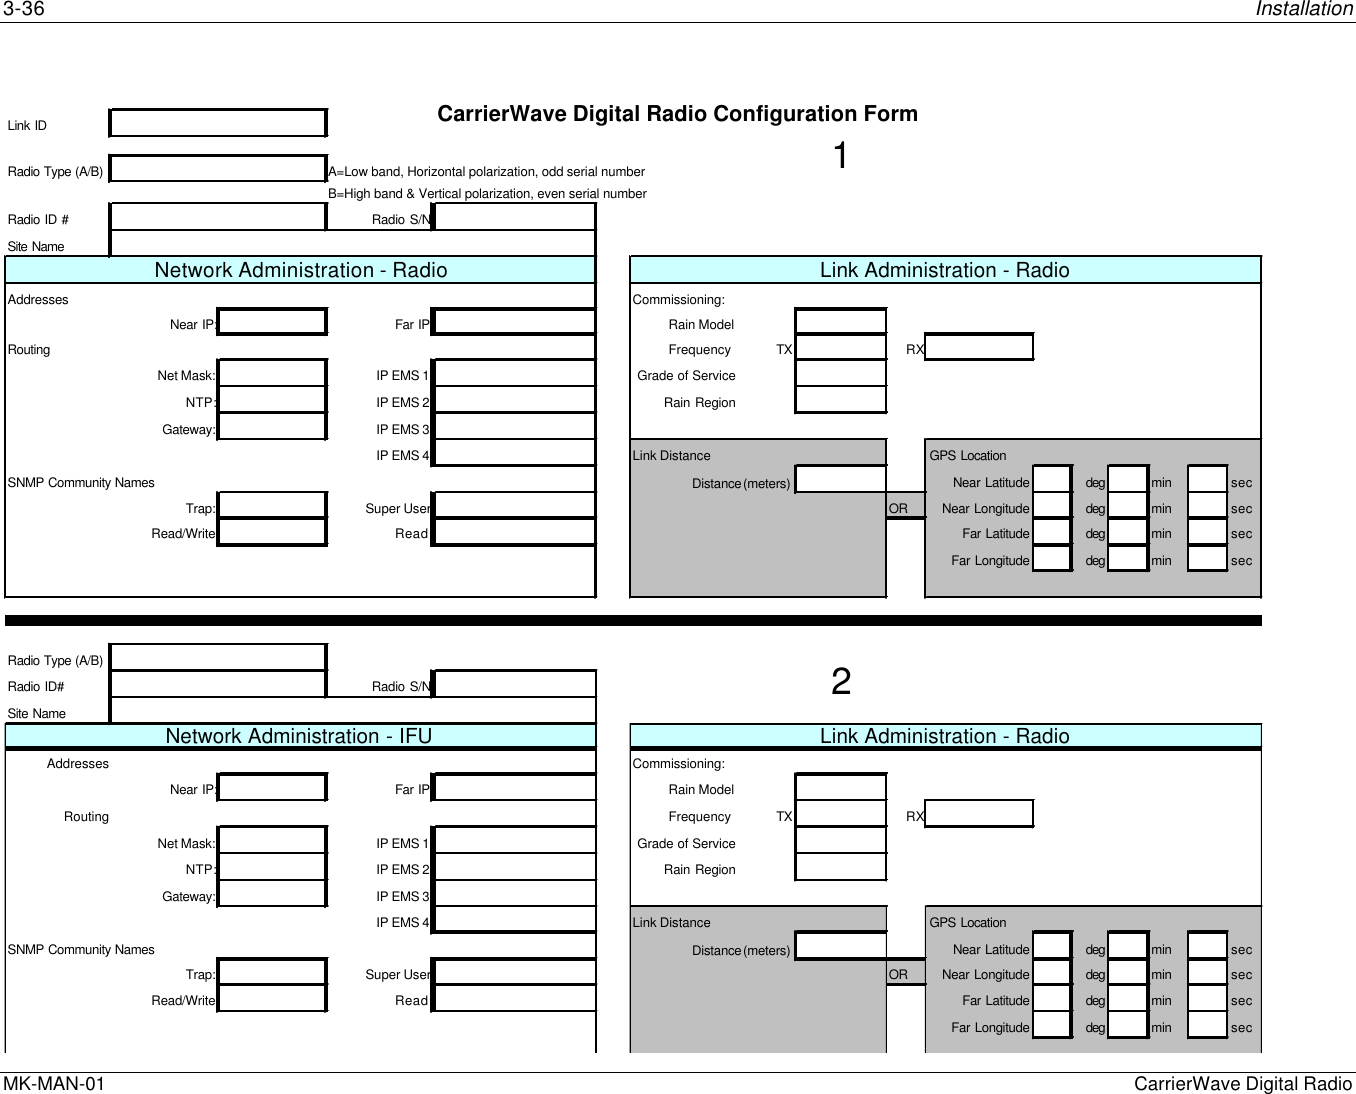 3-36 InstallationMK-MAN-01  CarrierWave Digital RadioCarrierWave Digital Radio Configuration Form Link IDRadio Type (A/B) A=Low band, Horizontal polarization, odd serial numberB=High band &amp; Vertical polarization, even serial numberRadio ID # Radio S/NSite NameAddresses Commissioning:Near IP: Far IP Rain ModelRouting Frequency  TX RXNet Mask: IP EMS 1 Grade of ServiceNTP: IP EMS 2 Rain RegionGateway: IP EMS 3IP EMS 4 Link Distance GPS LocationSNMP Community Names Near Latitude deg min secTrap: Super User OR Near Longitude deg min secRead/Write Read: Far Latitude deg min secFar Longitude deg min secRadio Type (A/B)Radio ID# Radio S/NSite Name Addresses Commissioning:Near IP: Far IP Rain ModelRouting Frequency  TX RXNet Mask: IP EMS 1 Grade of ServiceNTP: IP EMS 2 Rain RegionGateway: IP EMS 3IP EMS 4 Link Distance GPS LocationSNMP Community Names Near Latitude deg min secTrap: Super User OR Near Longitude deg min secRead/Write Read: Far Latitude deg min secFar Longitude deg min secDistance (meters)Network Administration - RadioDistance (meters)Link Administration - Radio12Network Administration - IFULink Administration - Radio